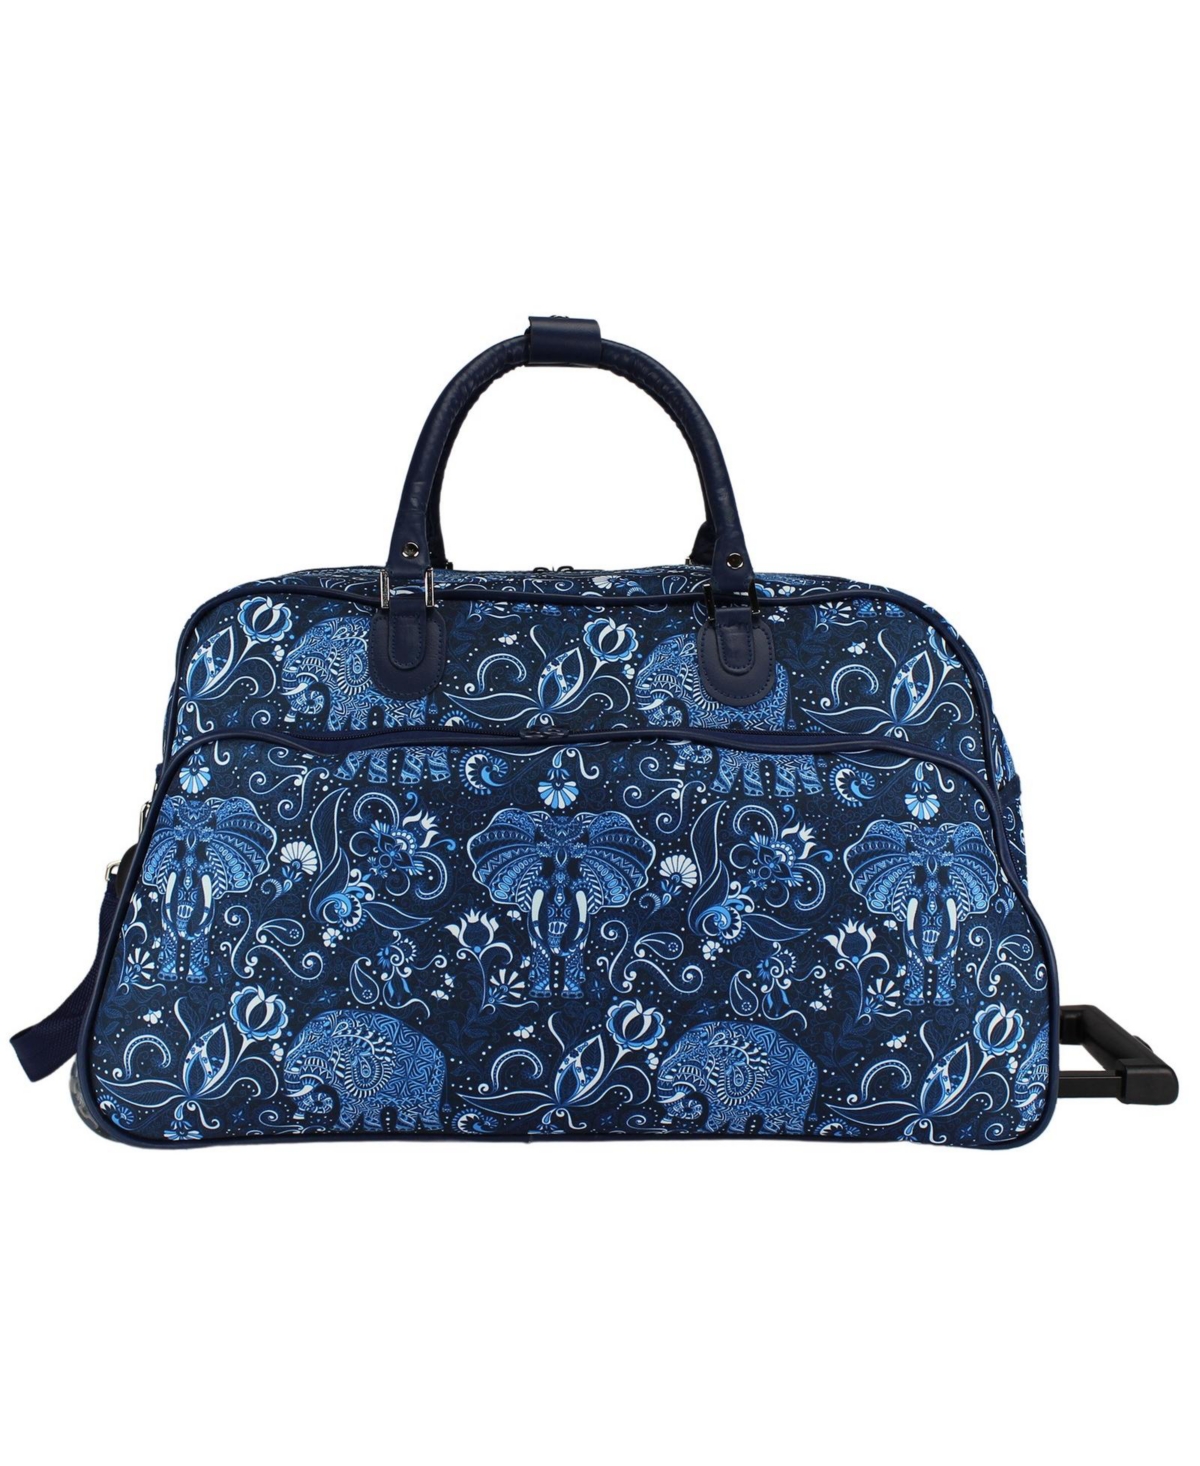 Wildlife Edit 21-Inch Carry-On Rolling Duffel Bag - Parrot hibiscus